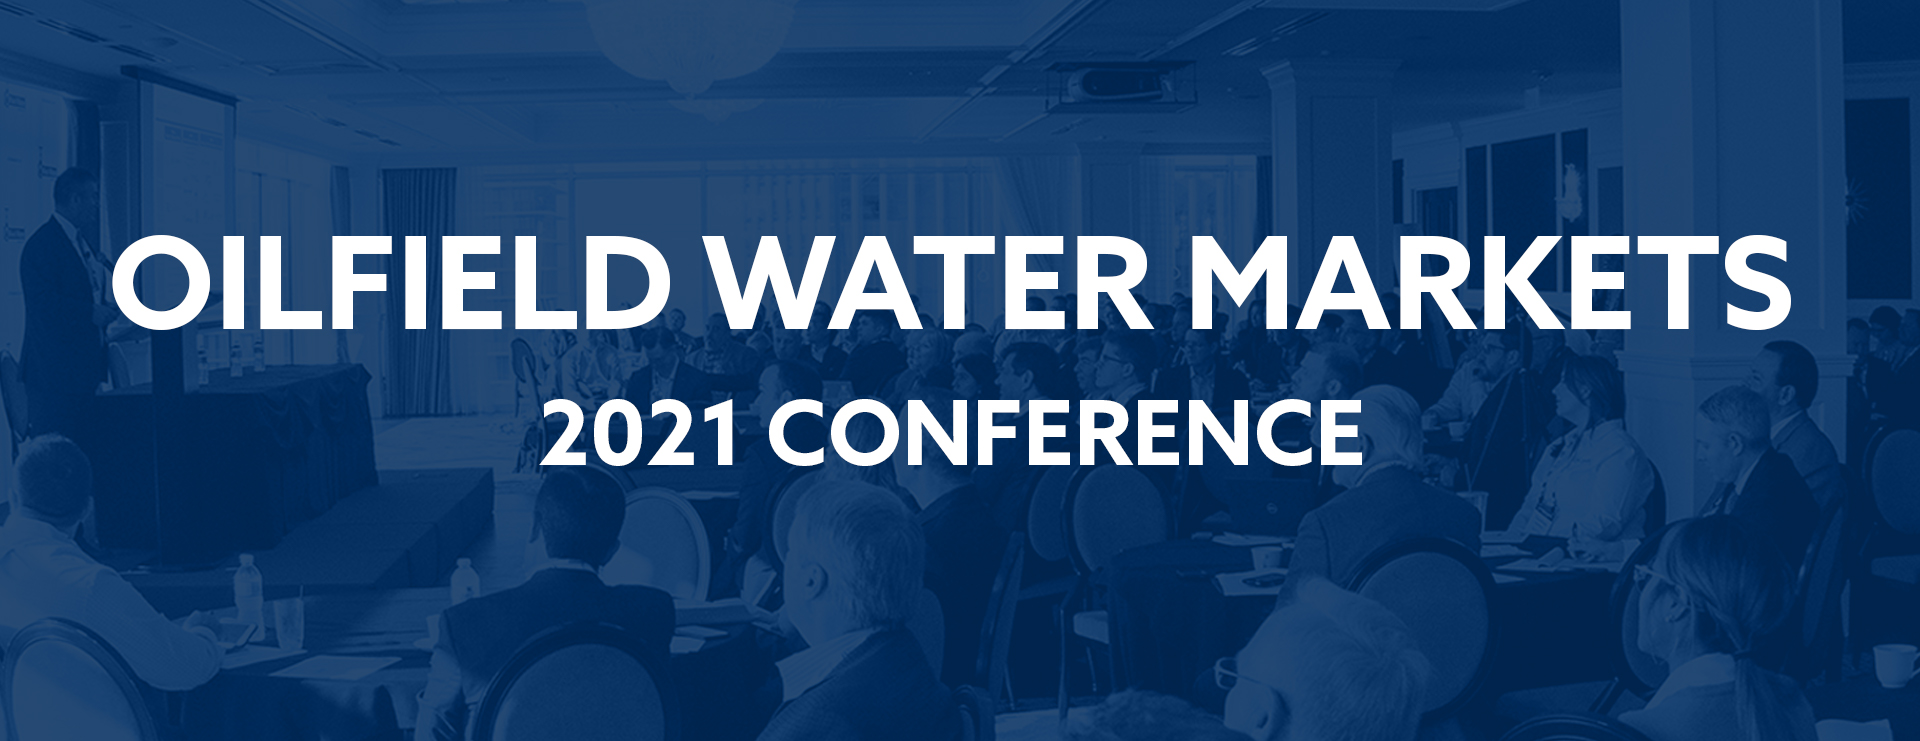 Visit us at the Oilfield Water Markets 2021 Conference featured image